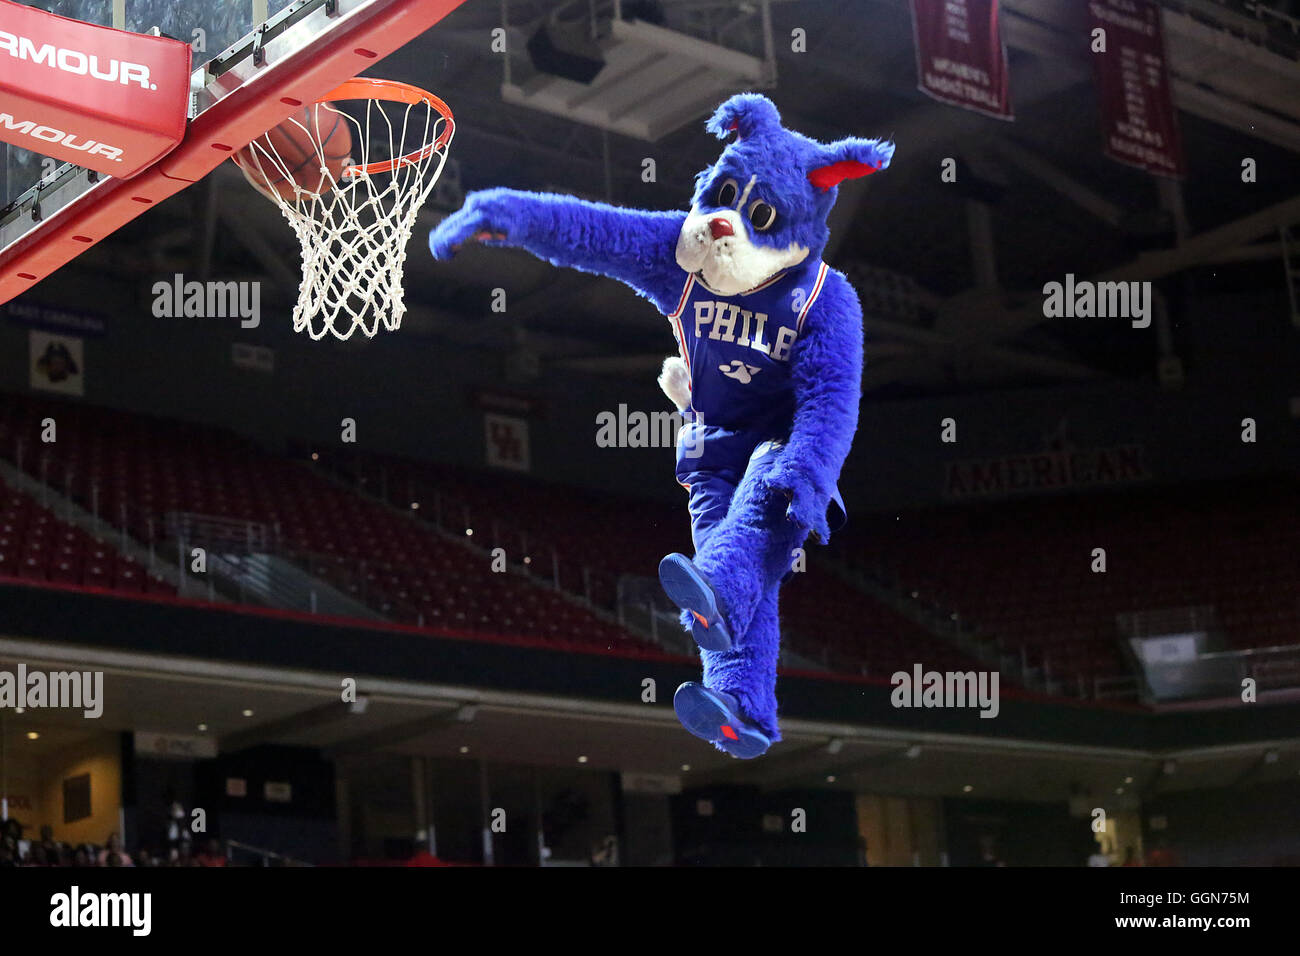 PHILADELPHIA, PA - AUGUST 5 : The Mascot pictured at The Allen Iverson Celebrity Basketball Game at Temple University's Liacouras Center in Philadelphia, Pa on August 5, 2016 photo credit Star Shooter/MediaPunch Stock Photo